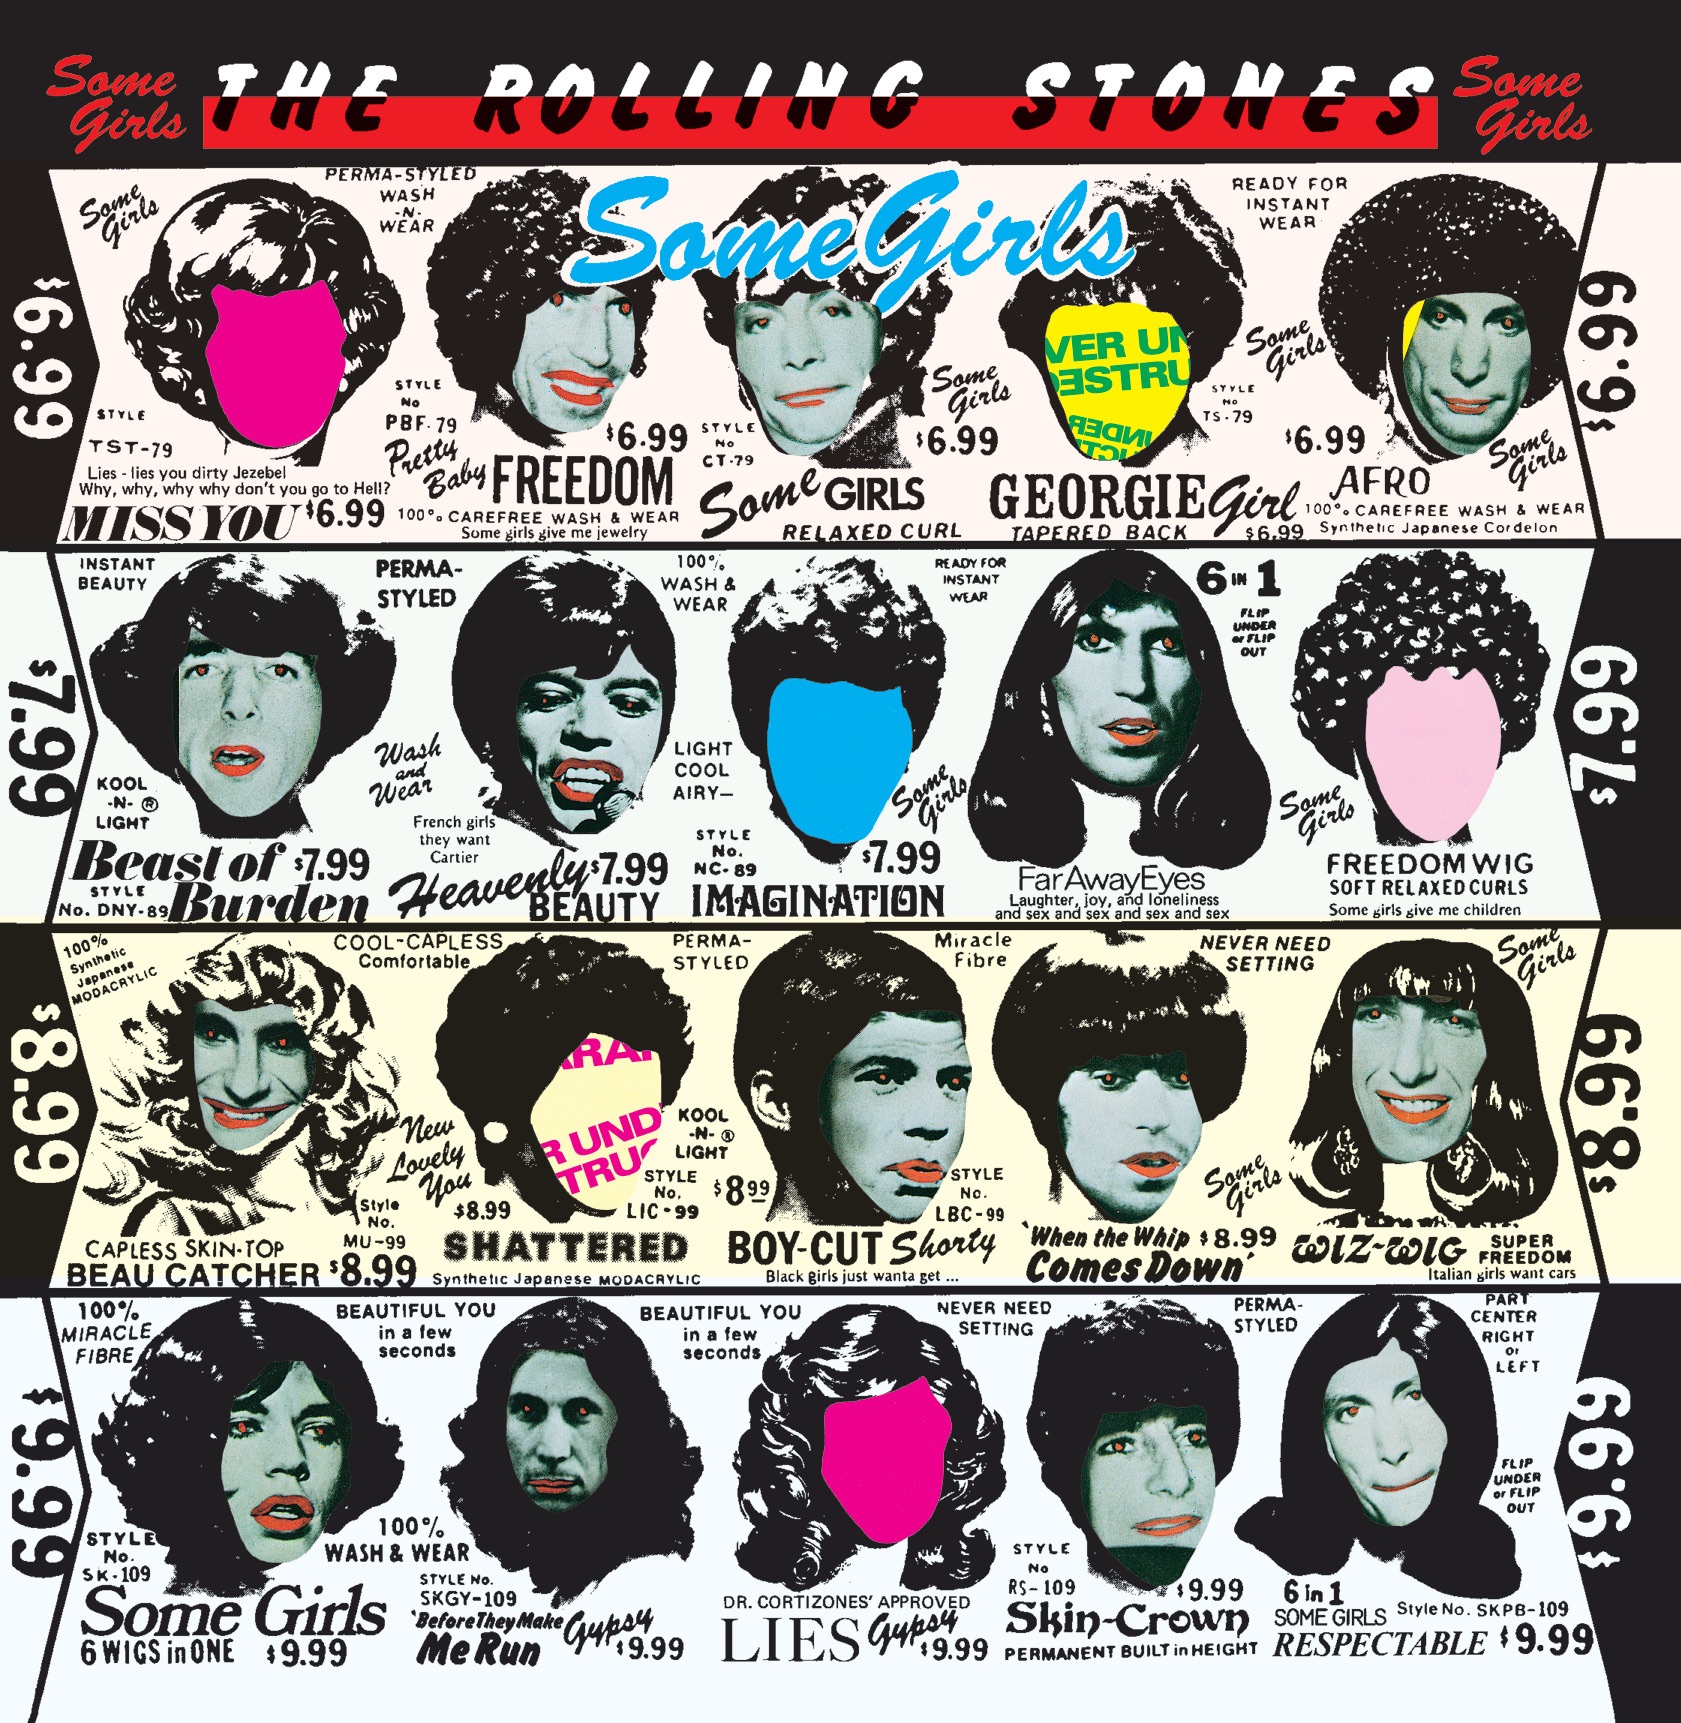 Art for Beast of Burden by The Rolling Stones